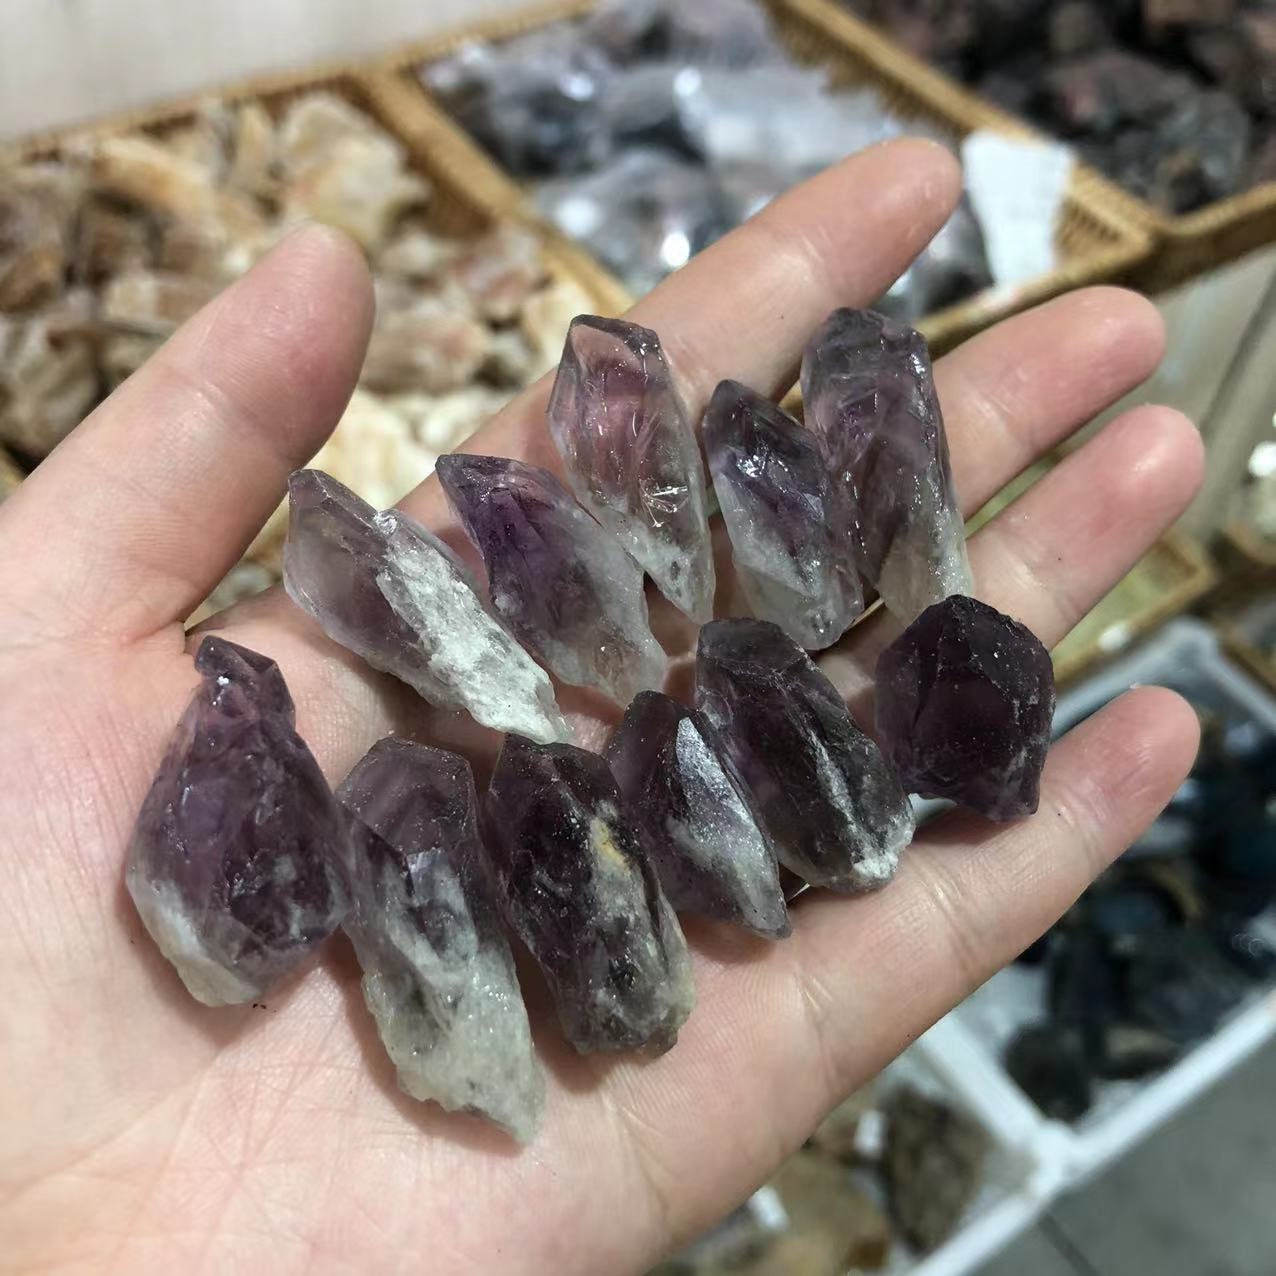 1000g Natural Brazil Amethyst Scepter Quartz Crystal Energy Wand for Reiki Healing and Home Decor